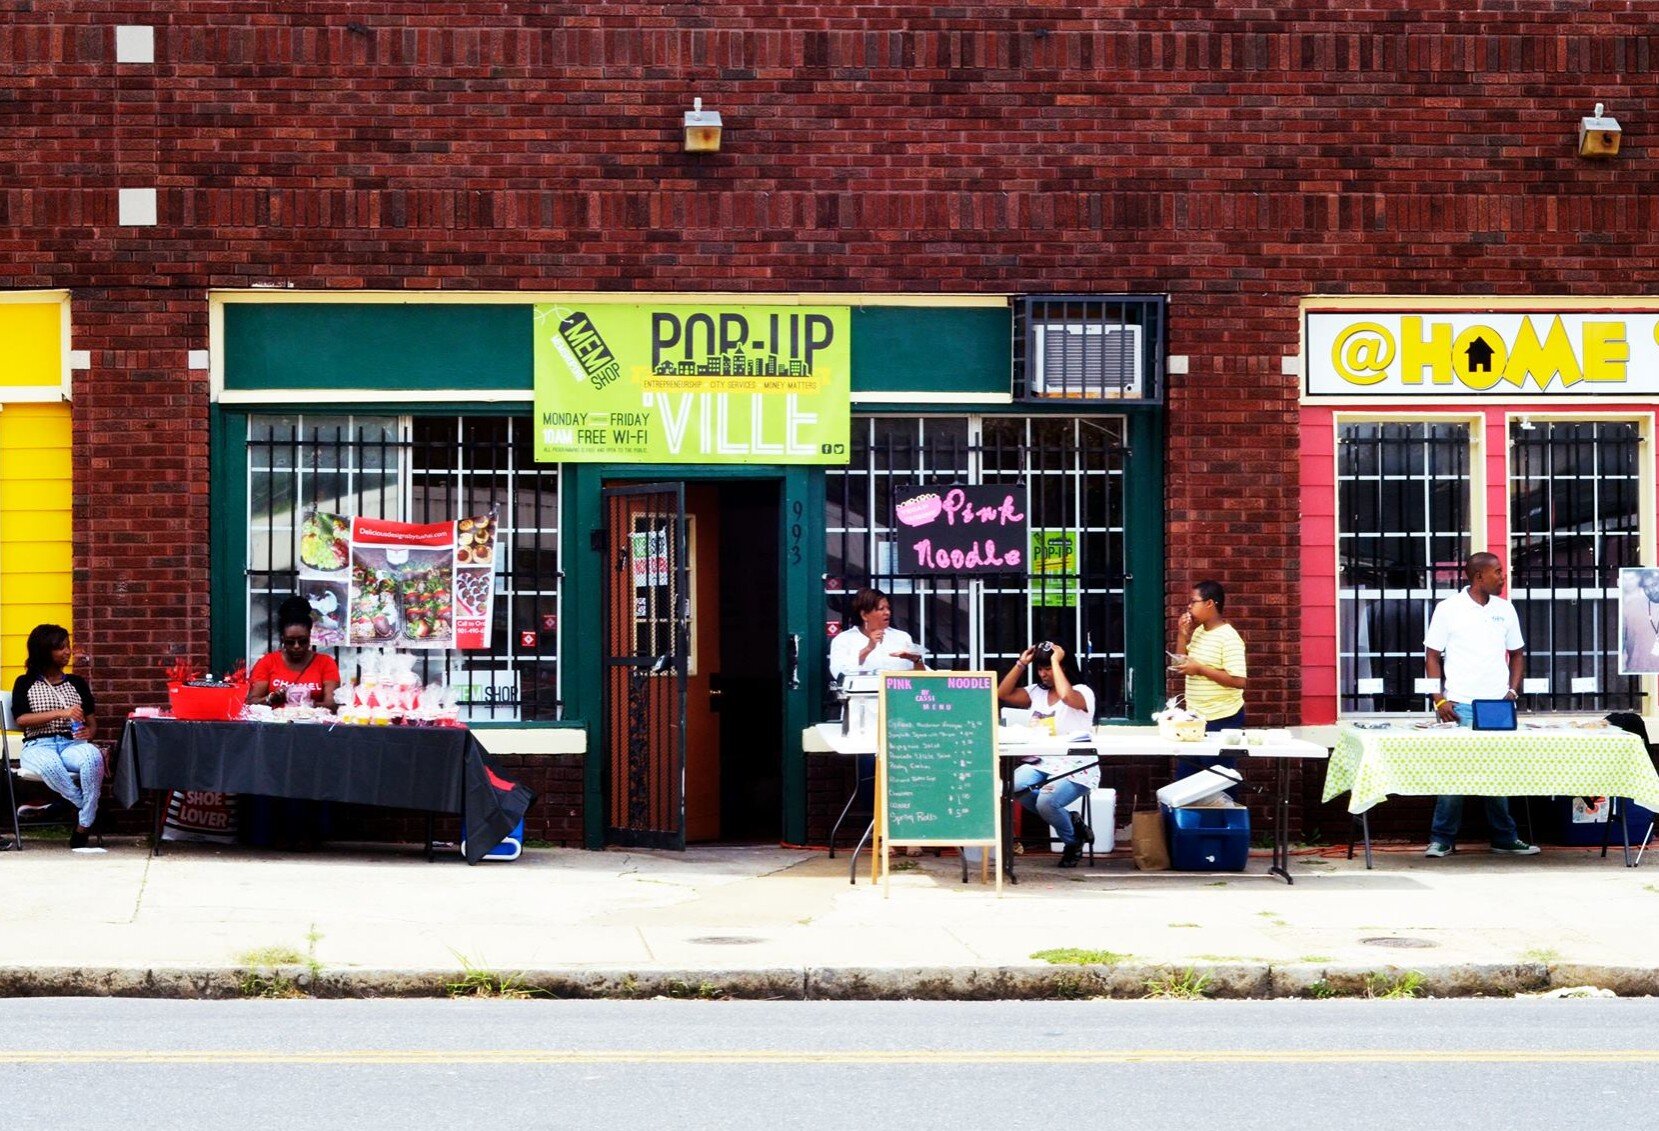 MEMShop helped launch new brick and mortar small businesses in South Memphis in 2014, including the Klassy Chics boutique and @ Home Computer Repair. (MEMShop)